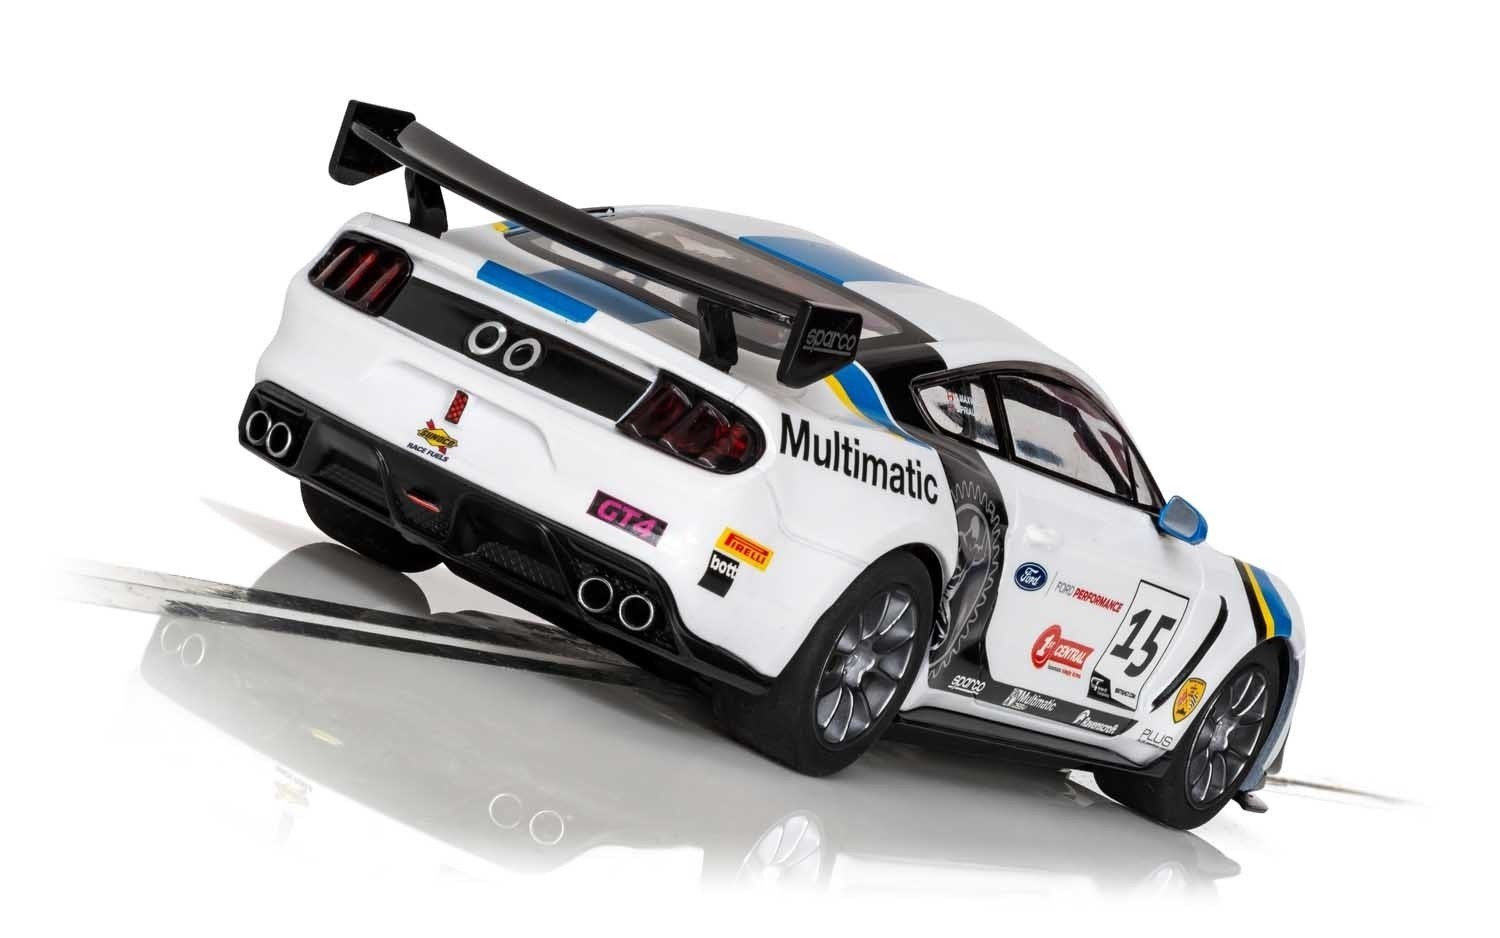 Superslot Ford Mustang GT4 British GT 2019 Ref H4173